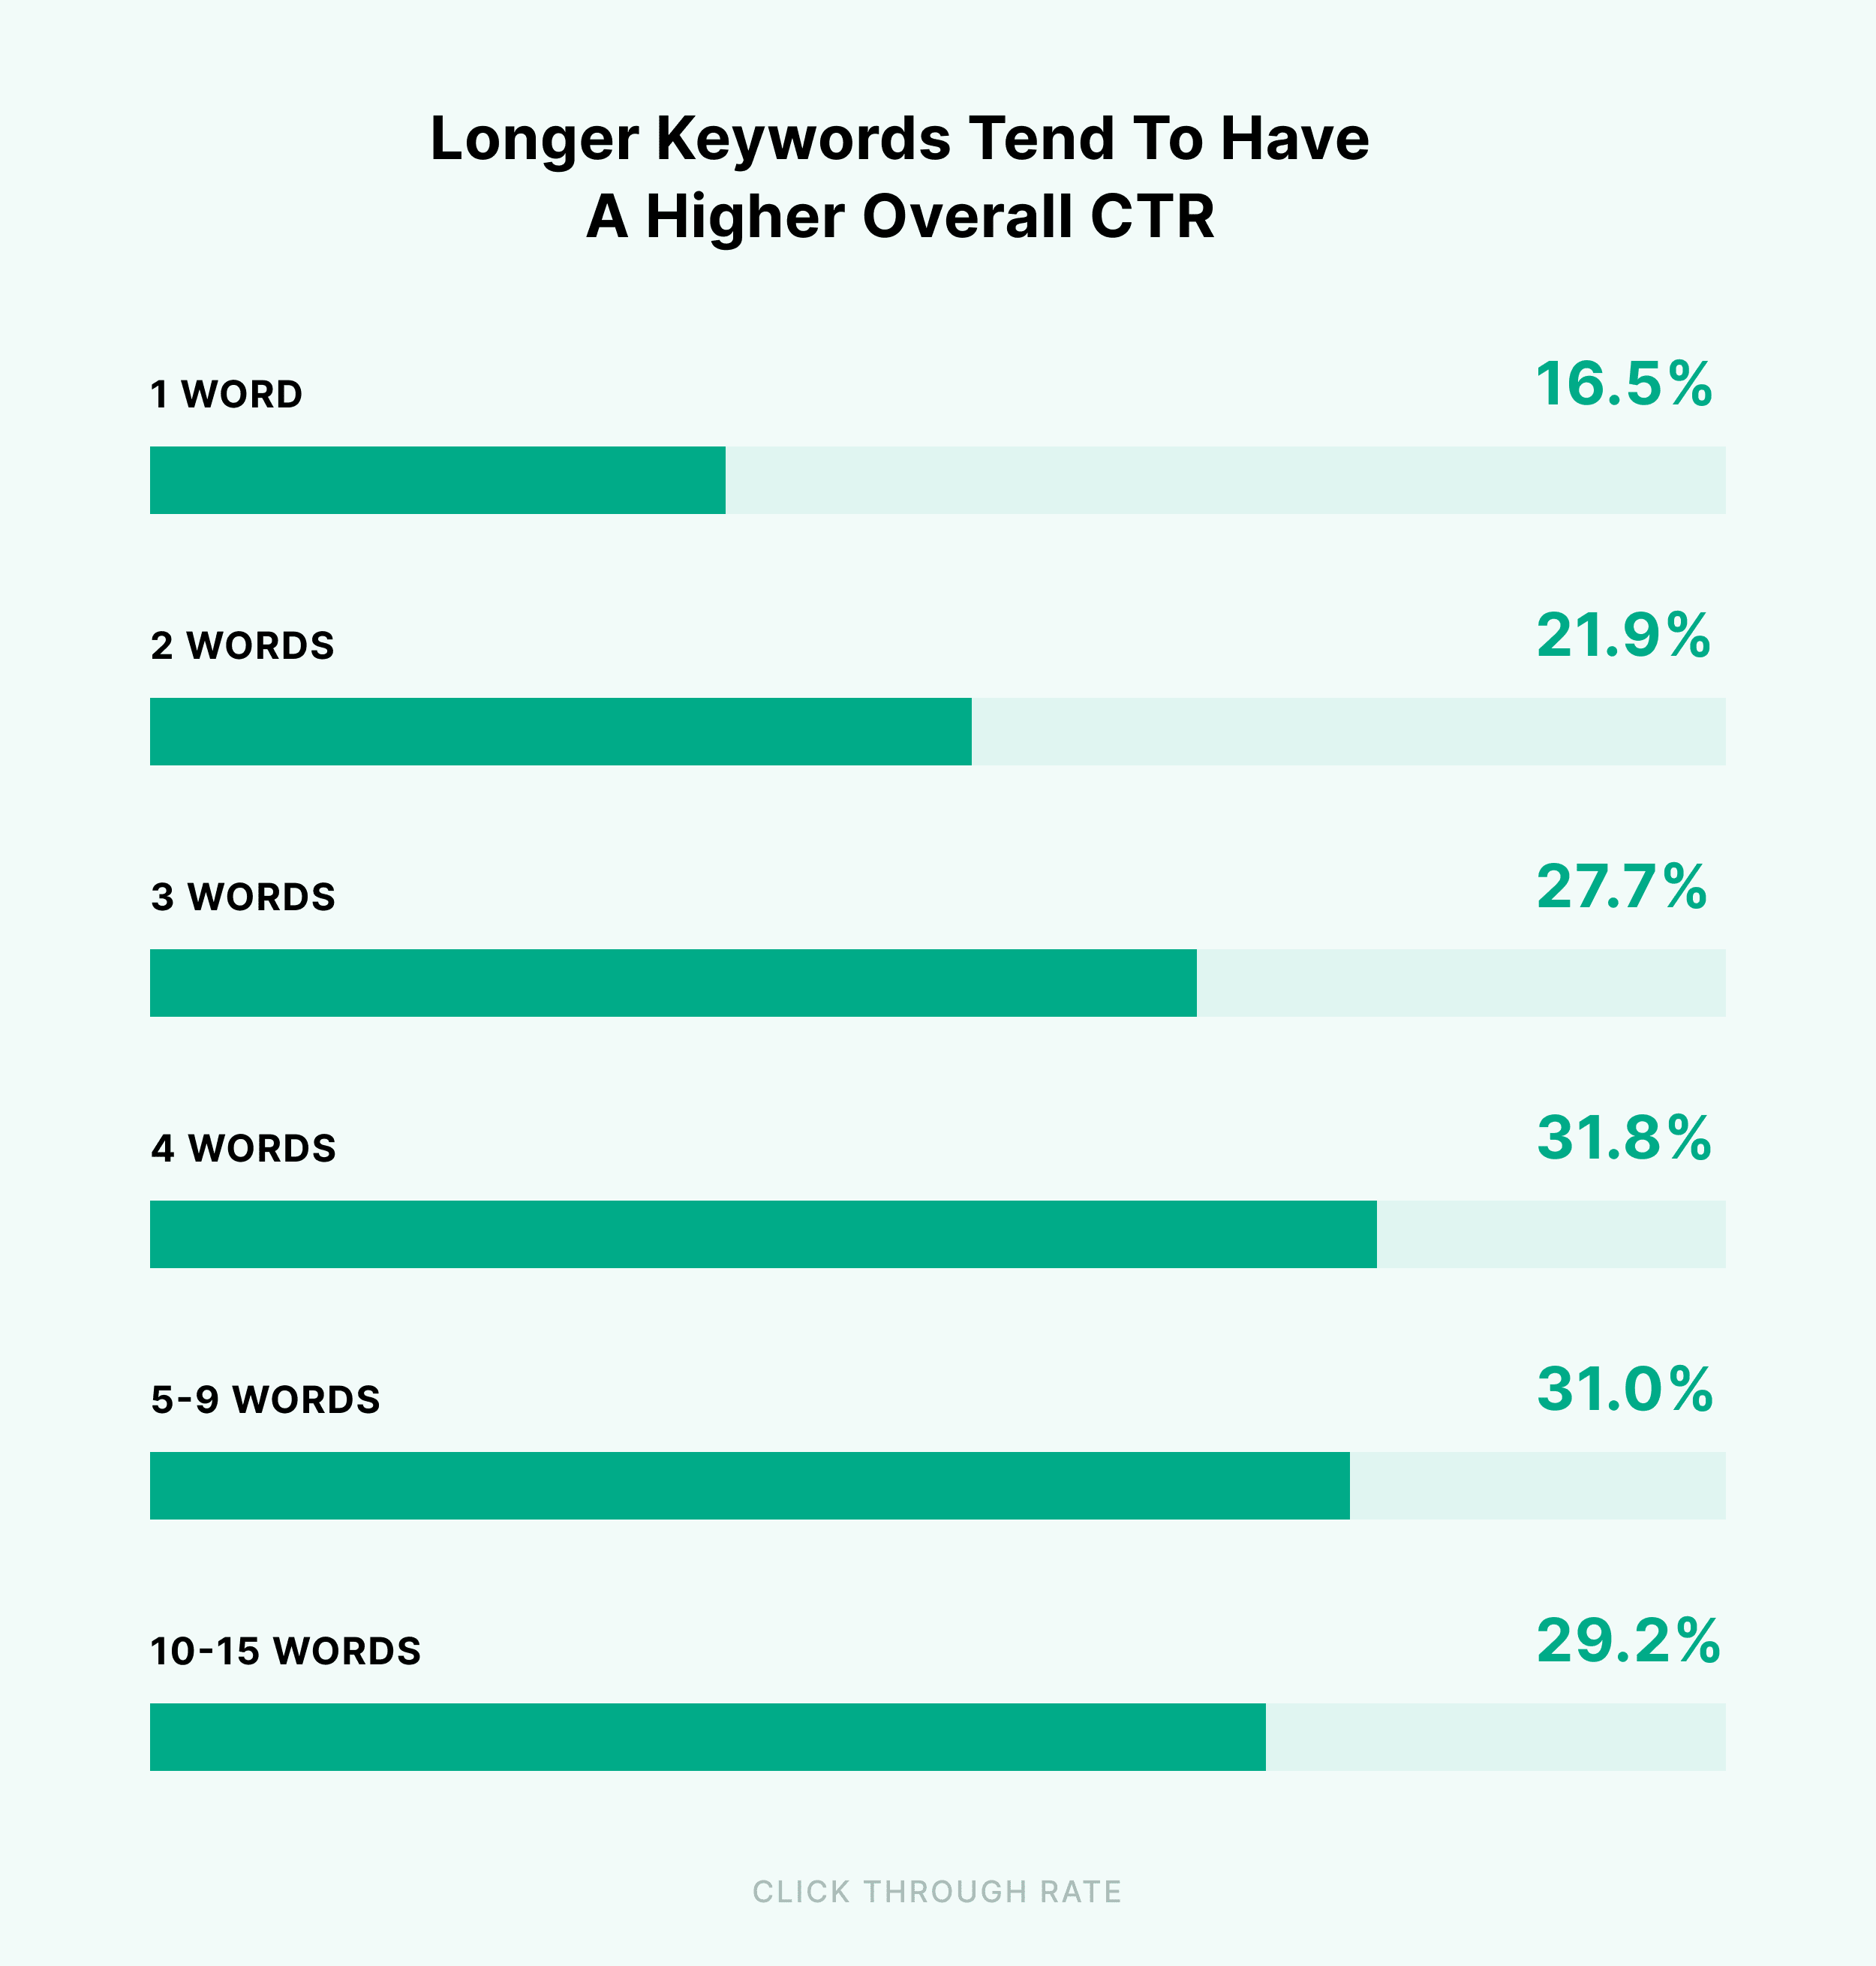 Longer keywords tend to have a higher overall CTR